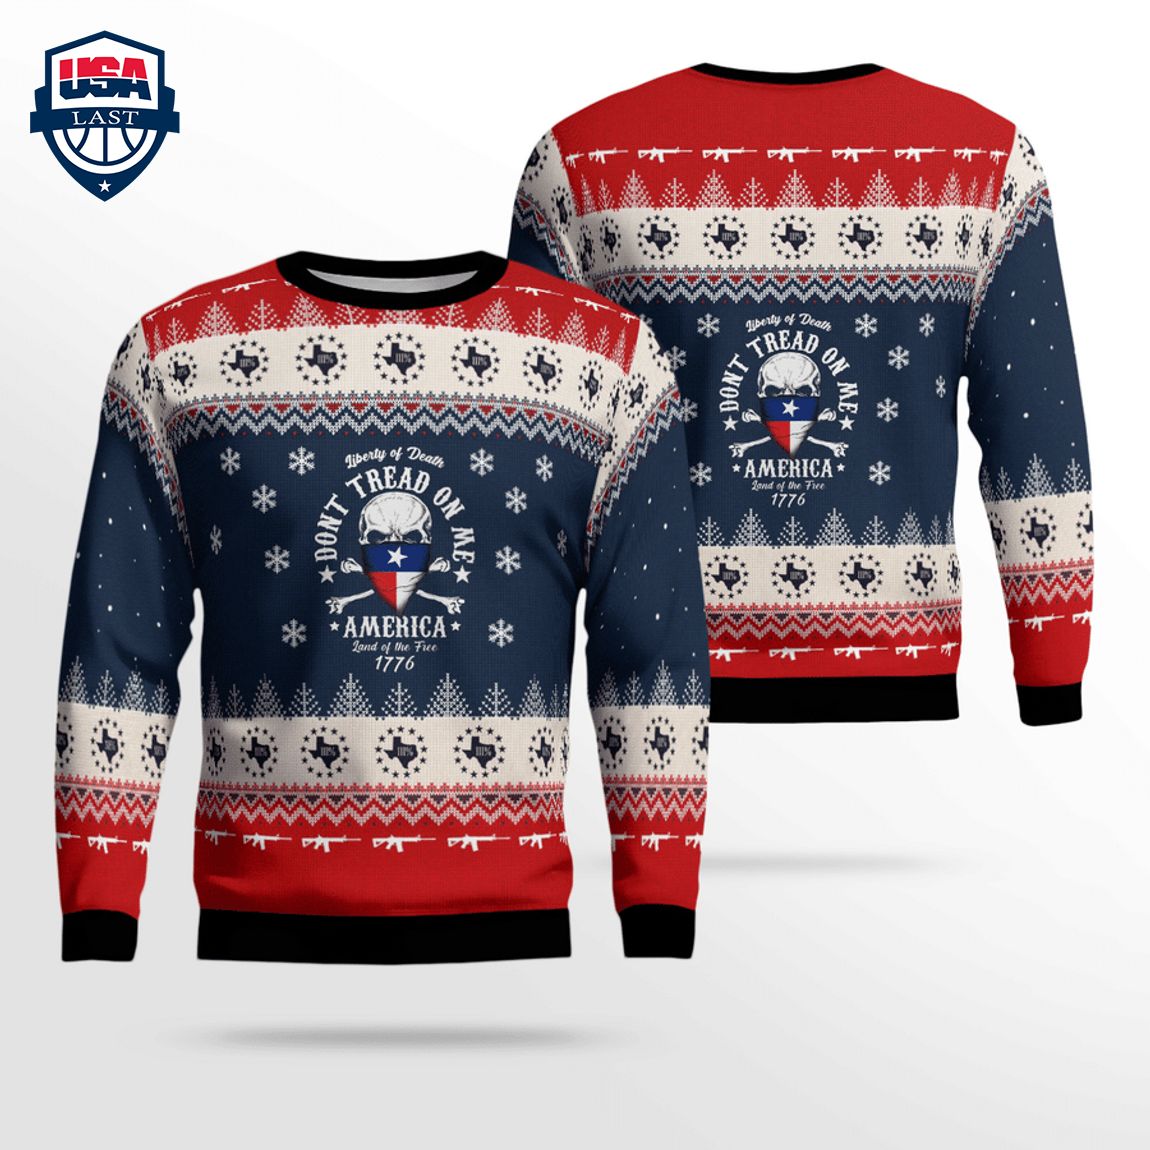 liberty-of-death-dont-tread-on-me-ver-2-3d-christmas-sweater-1-JOt83.jpg